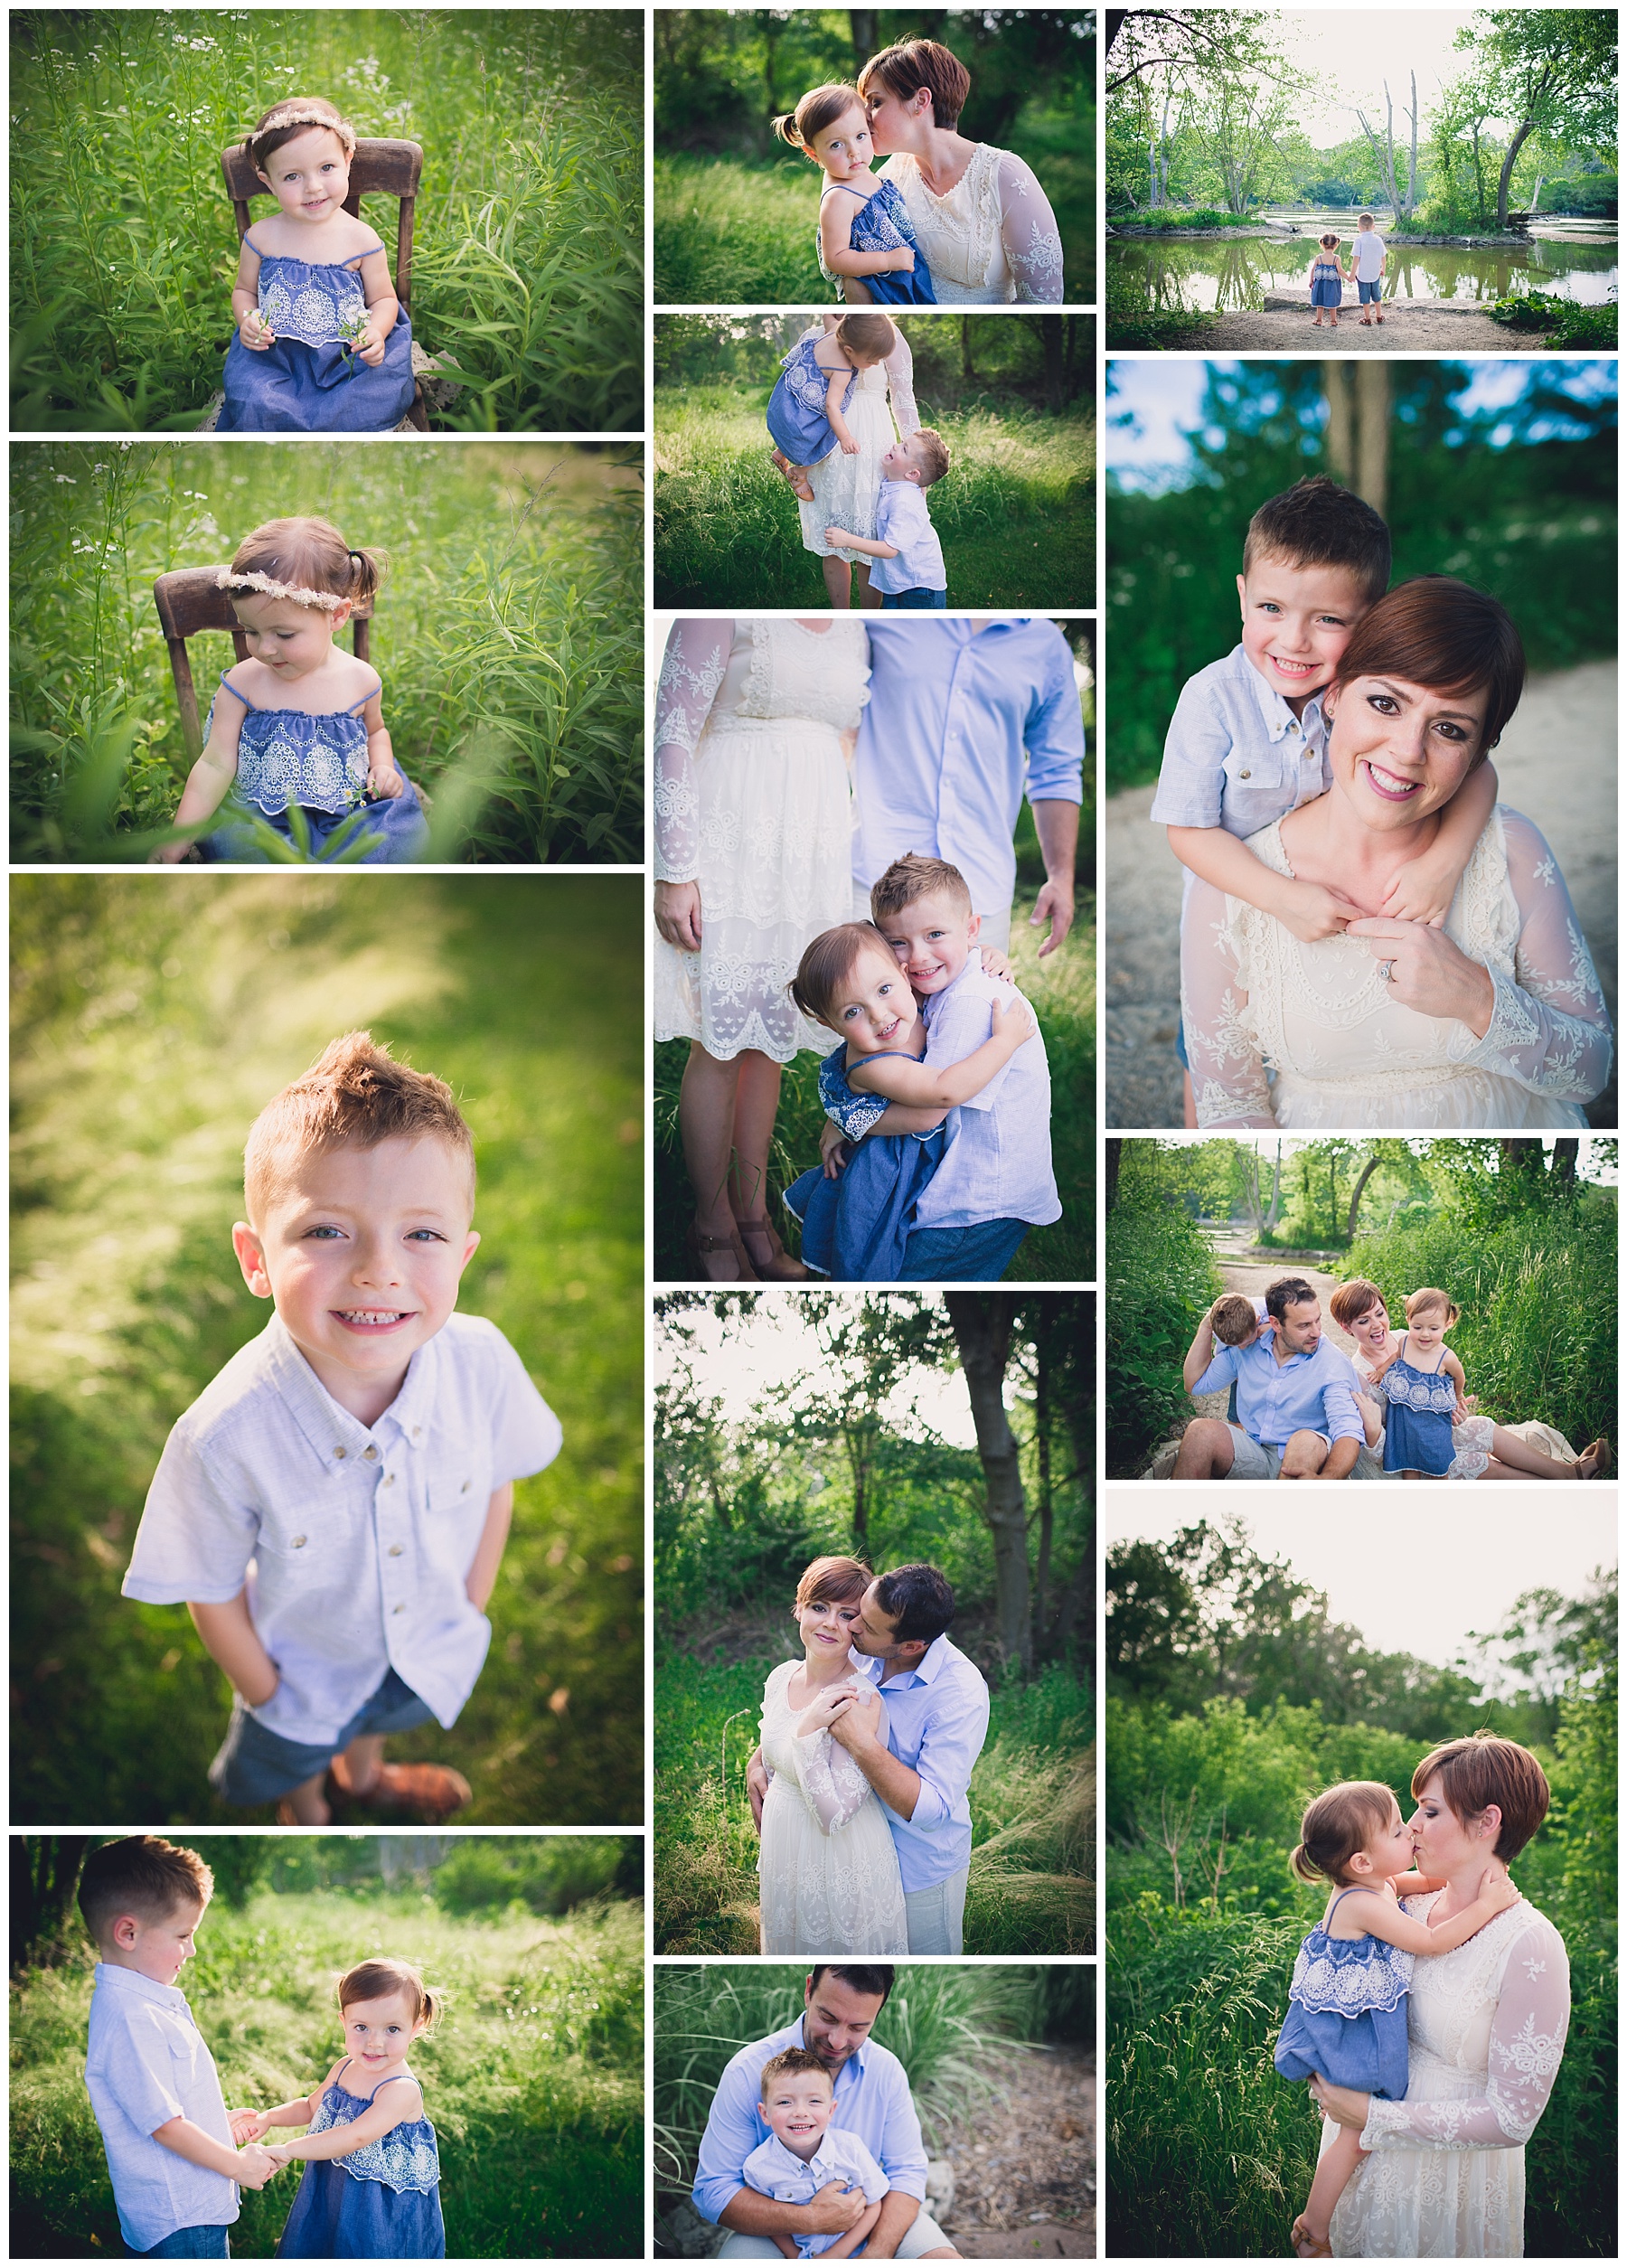 The D Family | Naperville IL Photographer | Patricia Anderson Photography